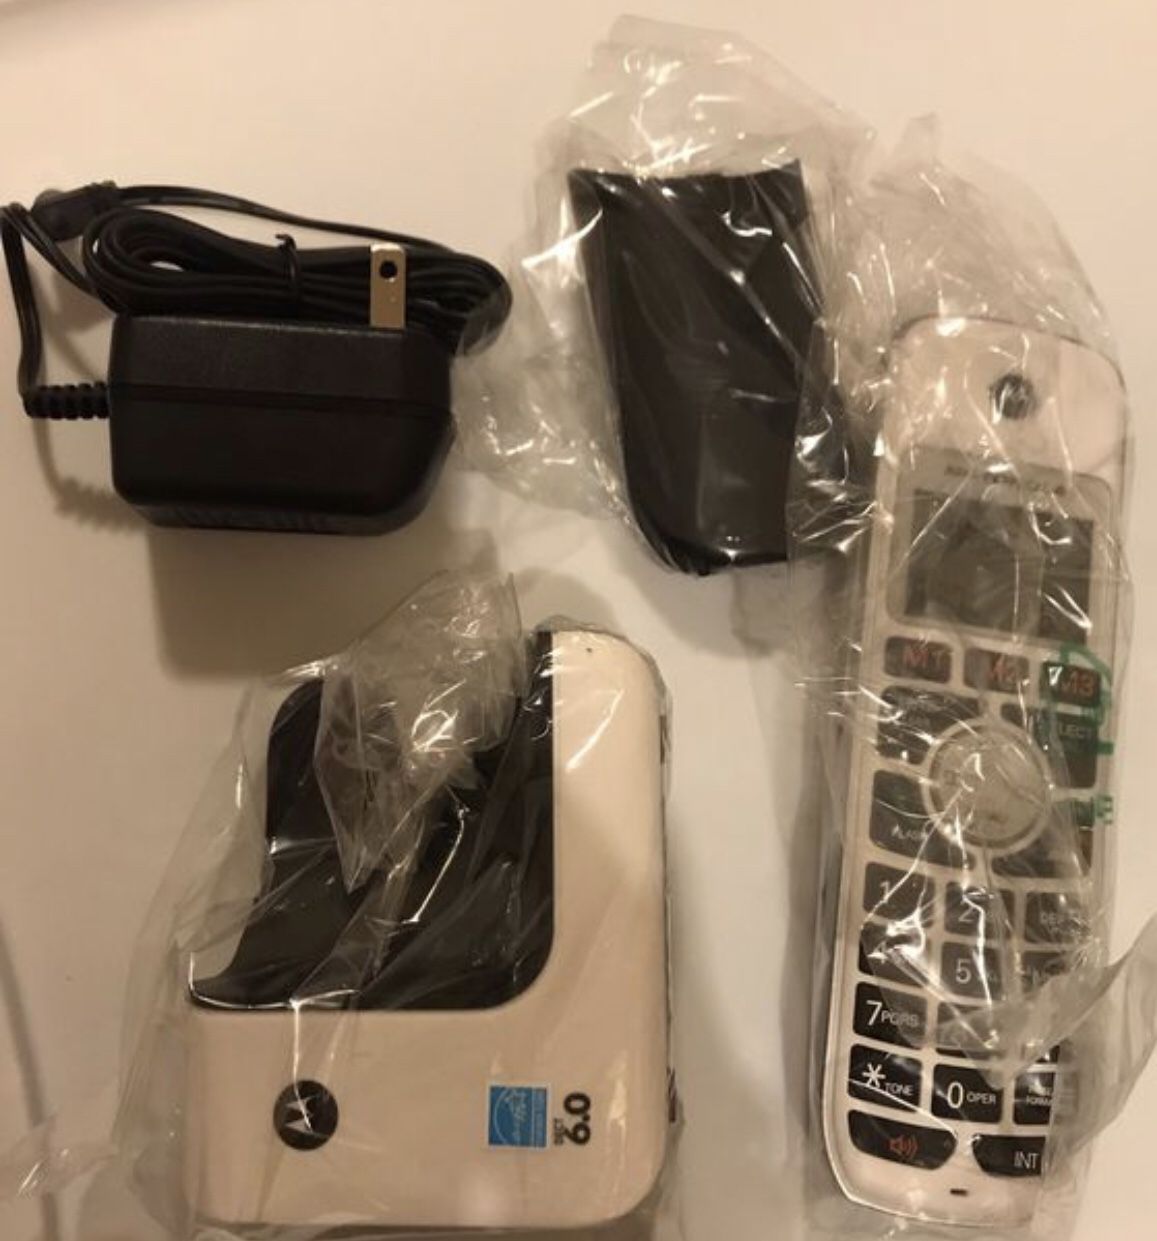 2 Boxes of Accessory Handset for Motorola